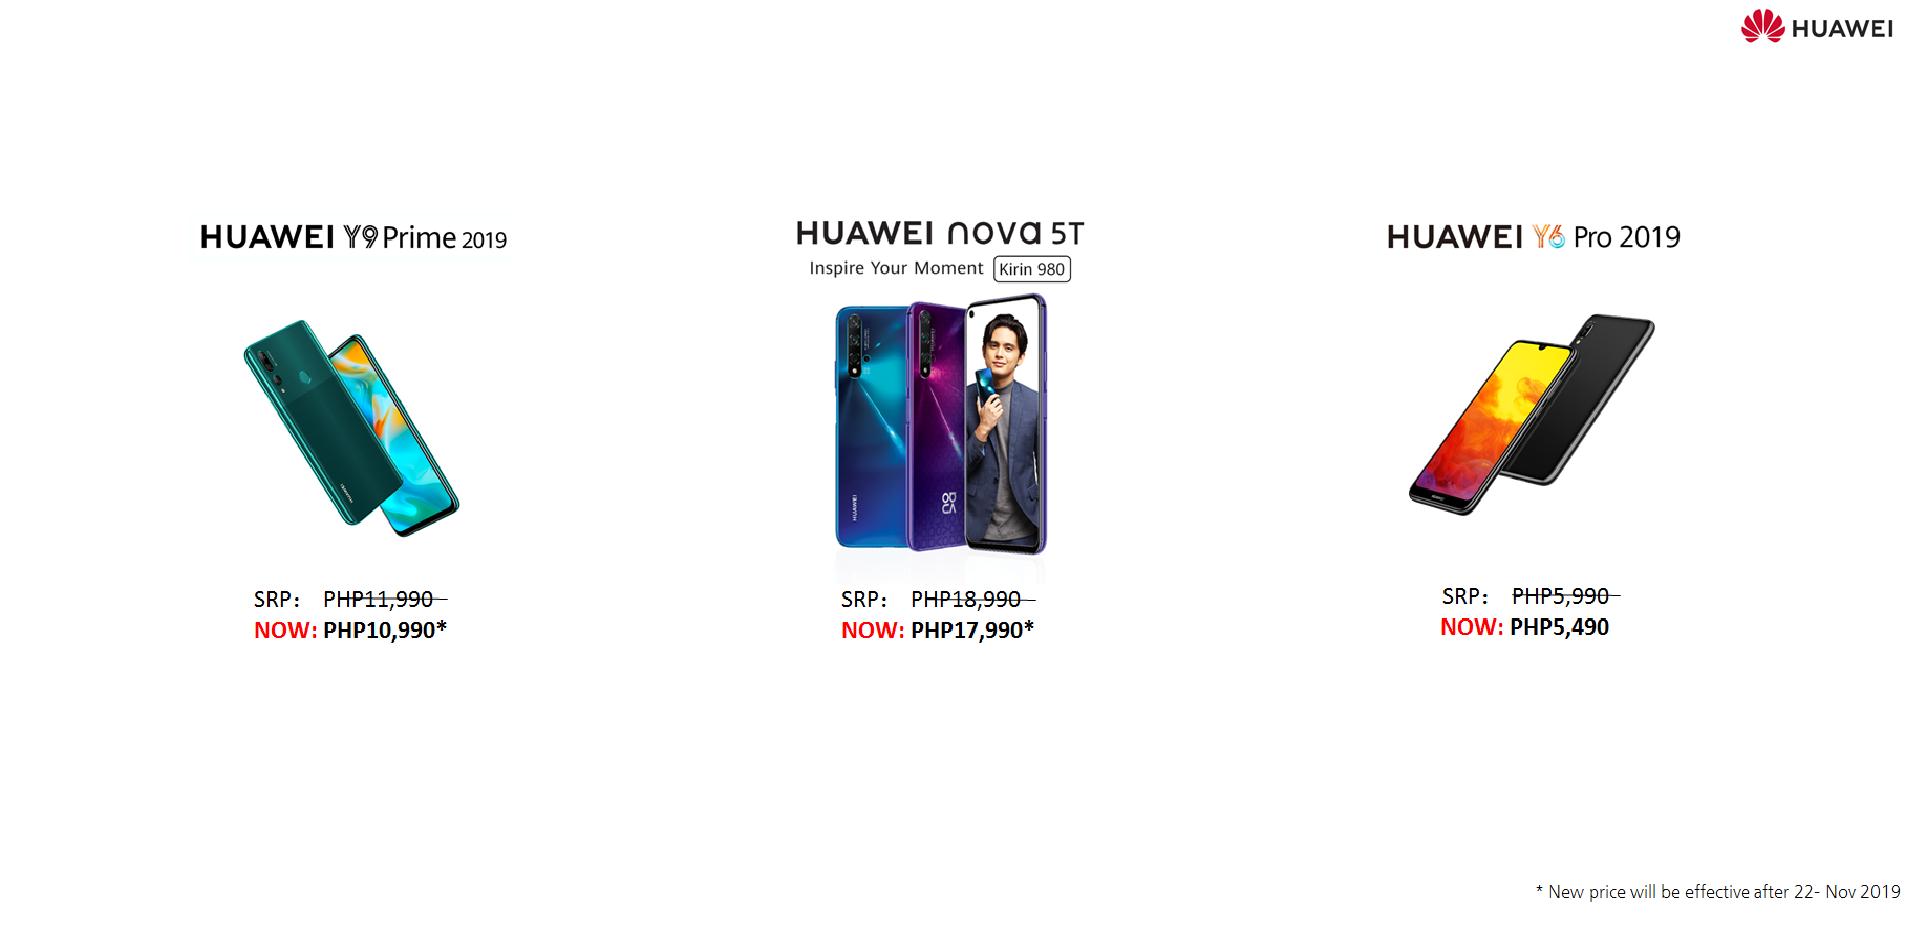 Get Your HUAWEI nova 5T, HUAWEI Y9 Prime 2019, and HUAWEI Y6 Pro 2019 in Up-To PHP1,000 OFF from Nov-22 2019